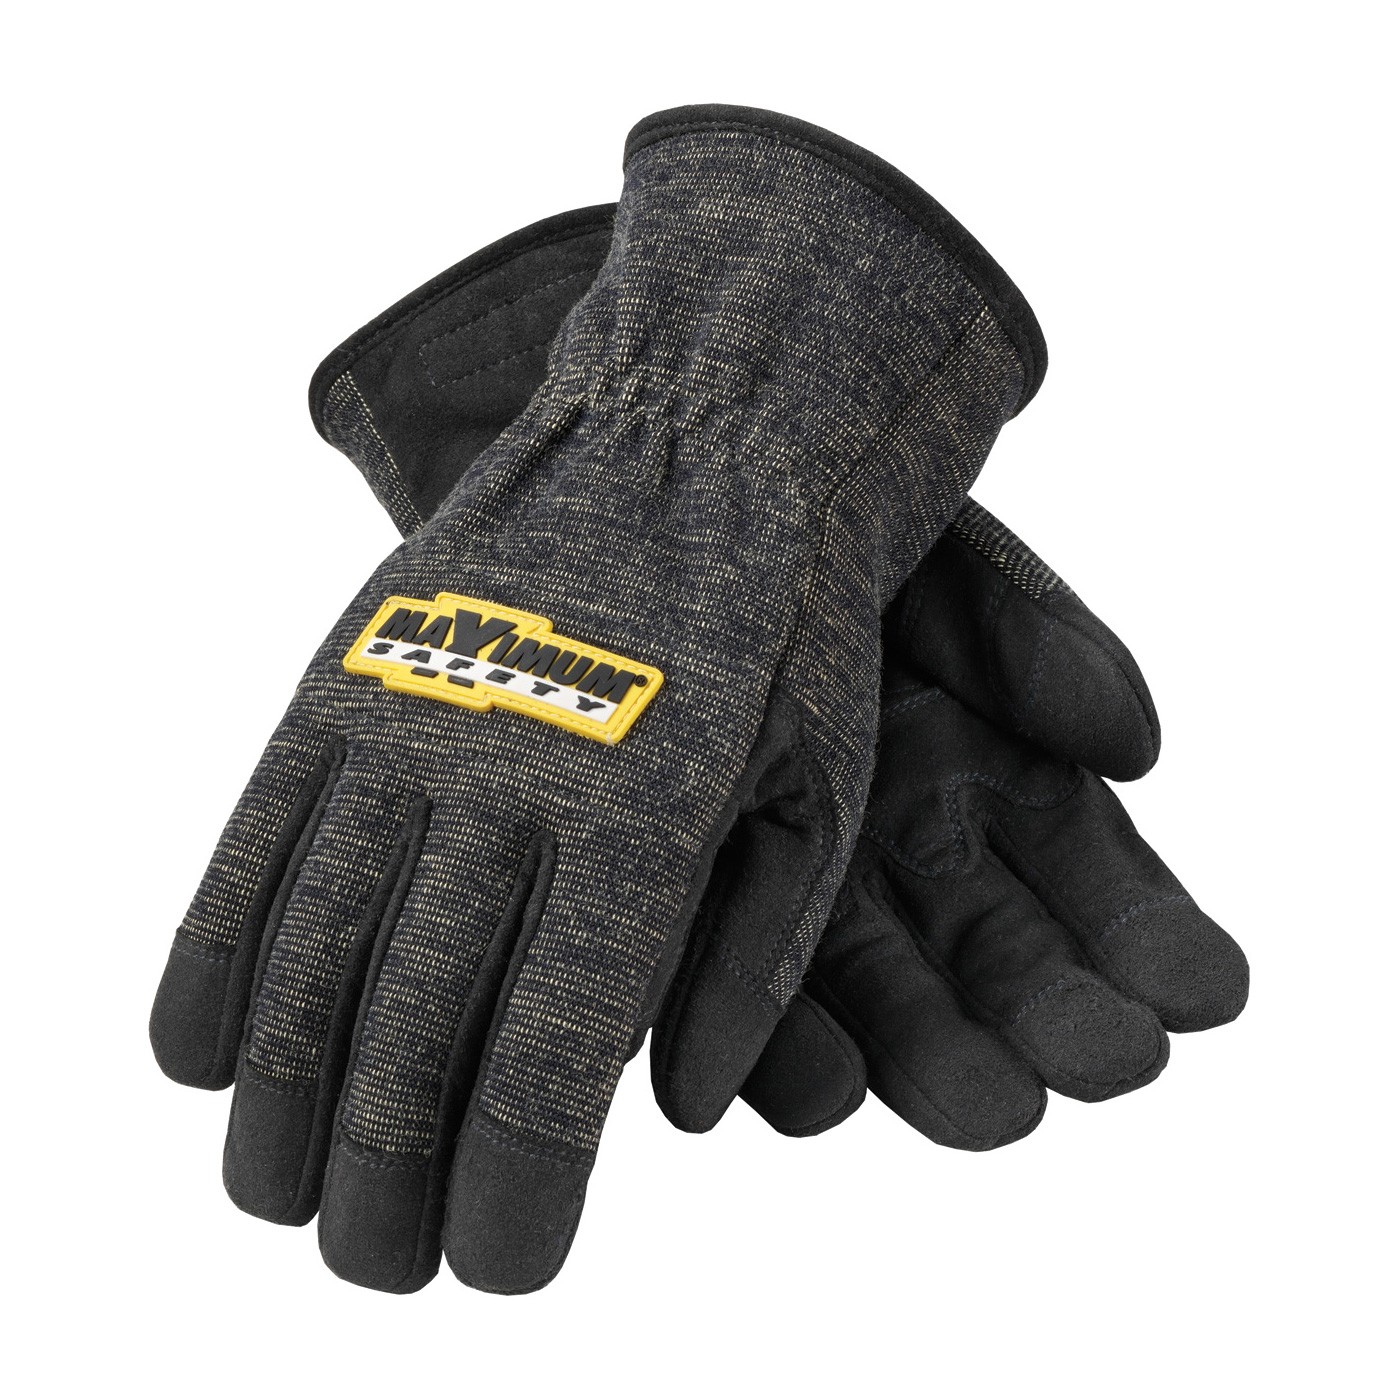 FR Treated Synthetic Leather Glove, Kevlar Lined, Reinforced Palm Size X-Large